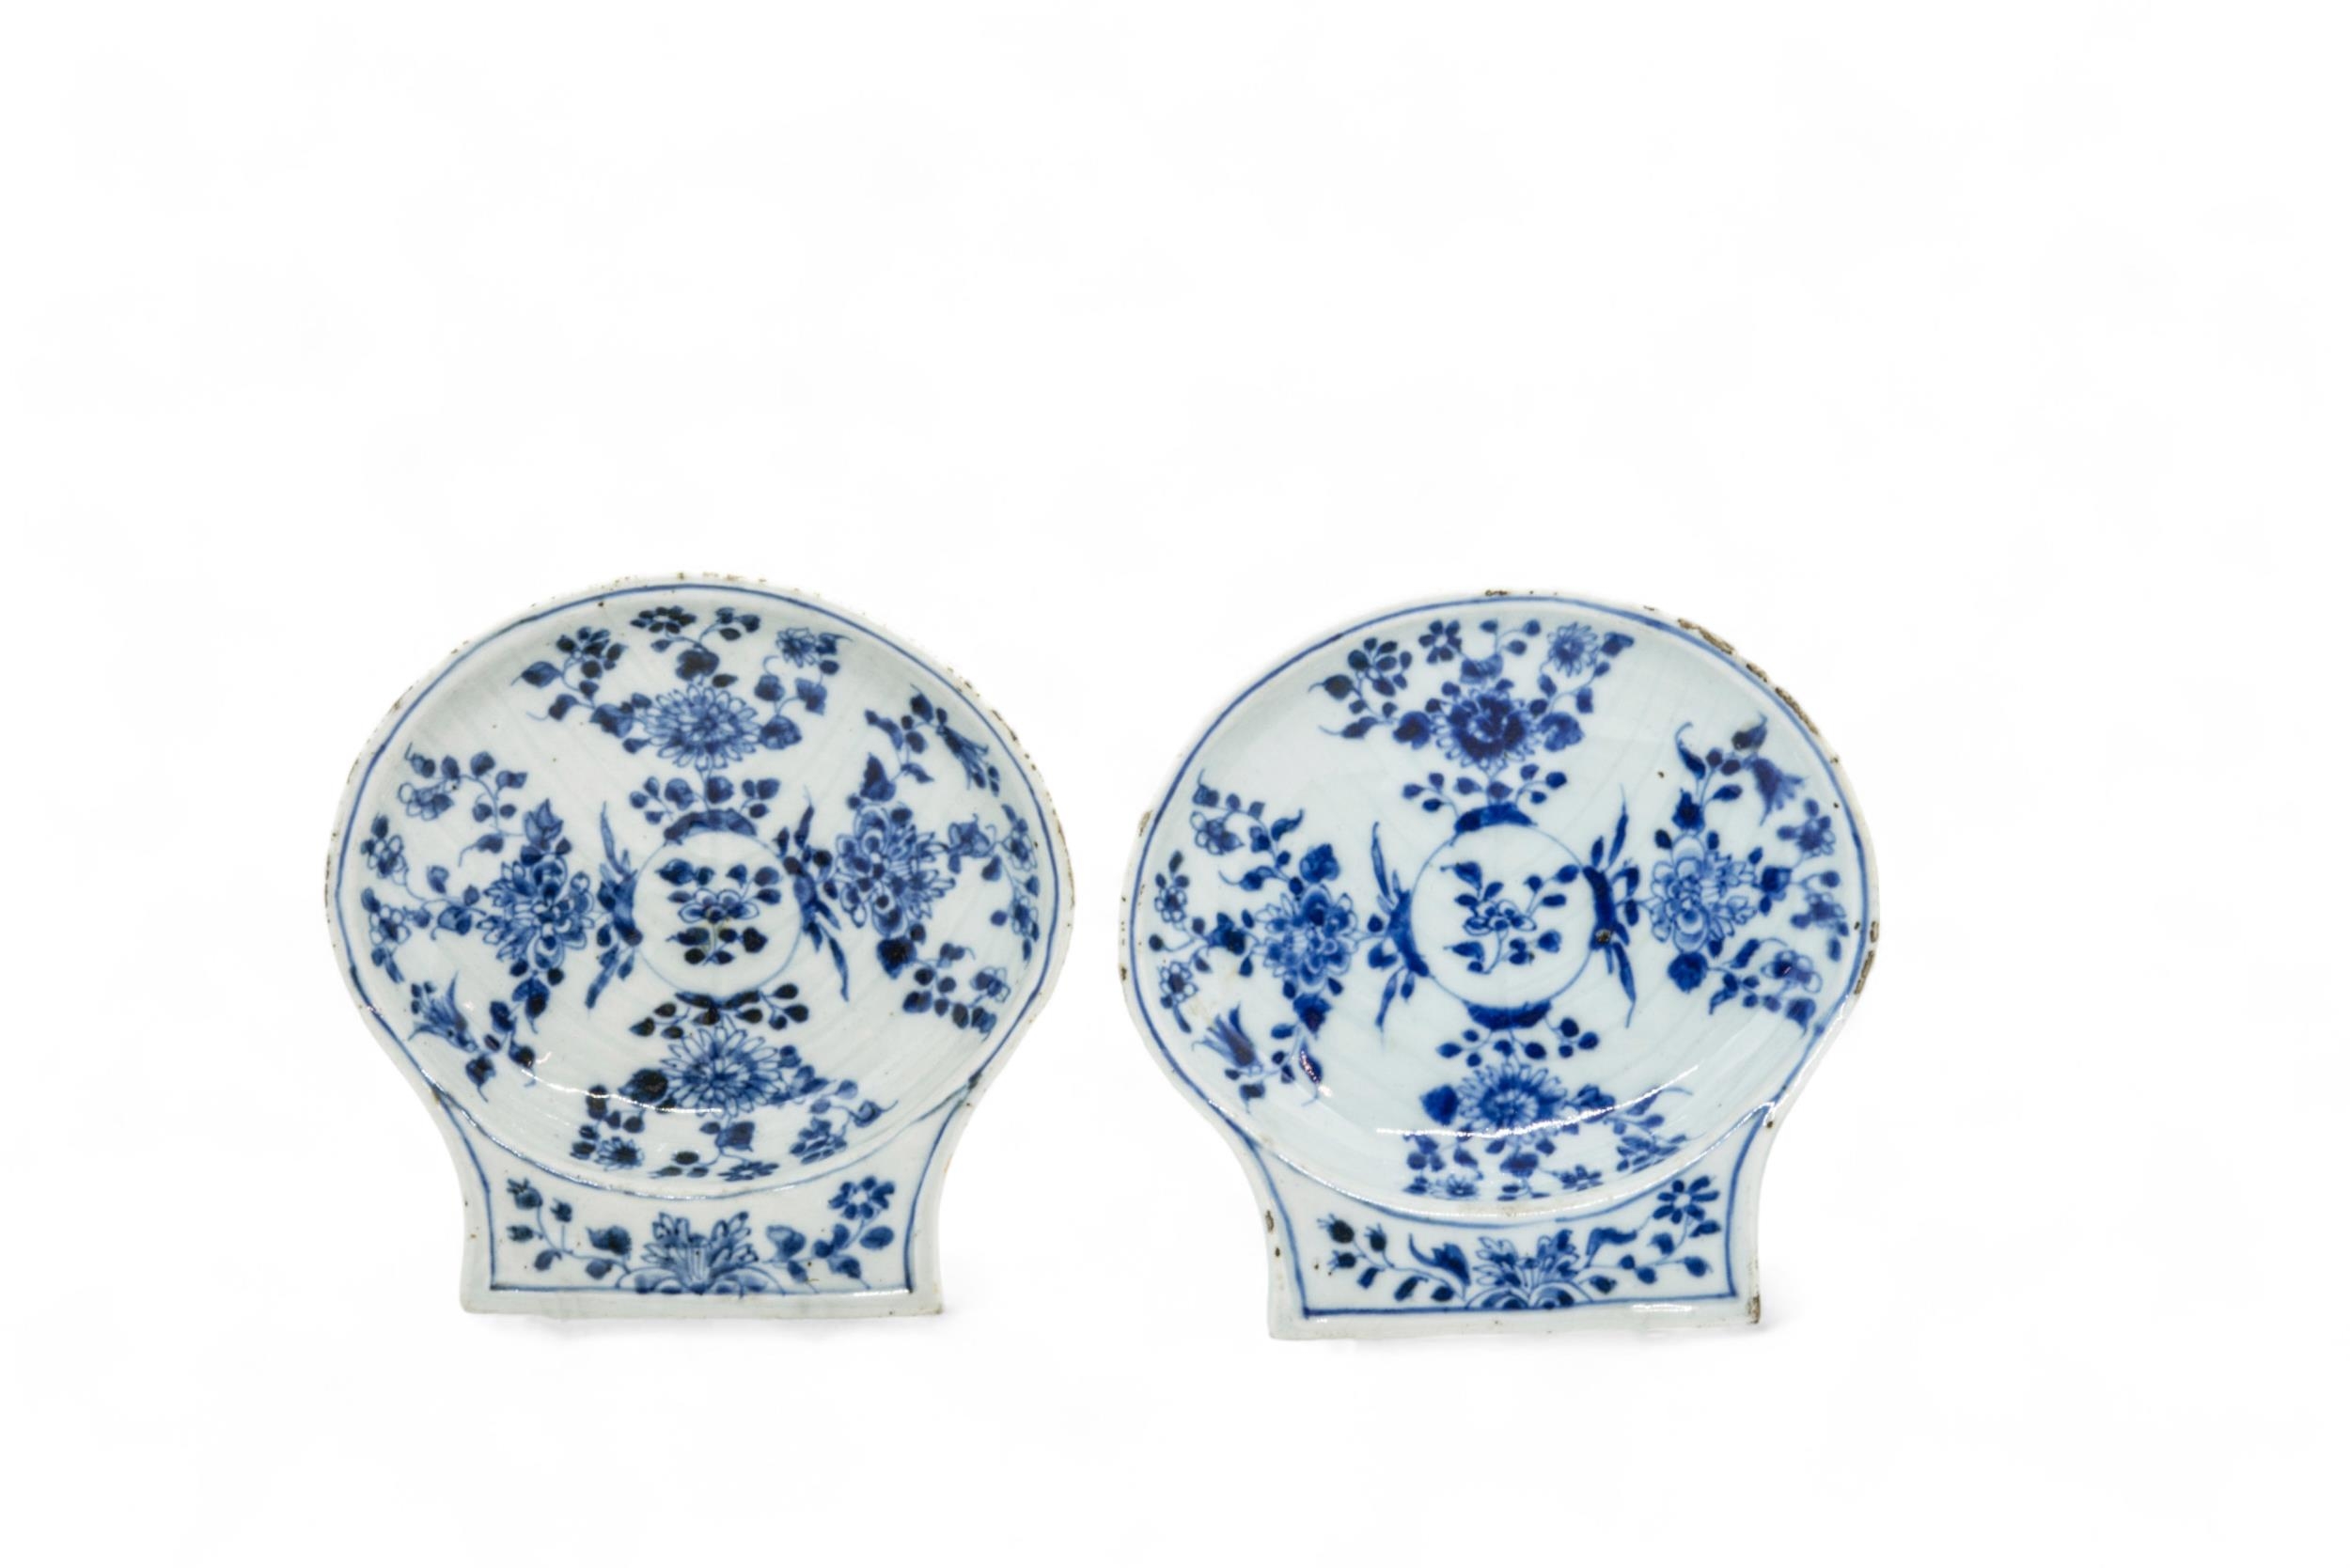 THREE PAIRS OF CHINESE EXPORT SHELL-FORM DISHES QING DYNASTY, 18TH CENTURY together with a single - Image 3 of 5